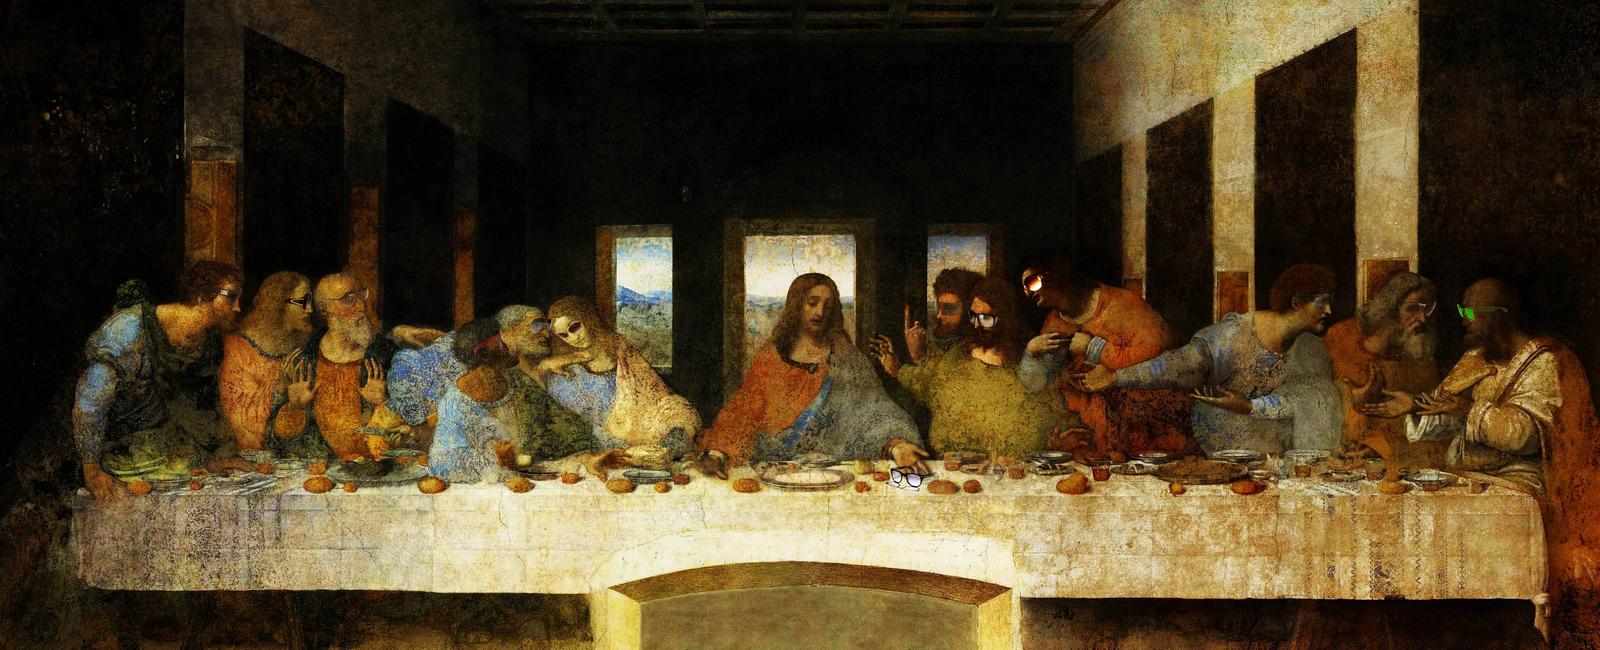 Probably the most famous dinner party in history lastsupper